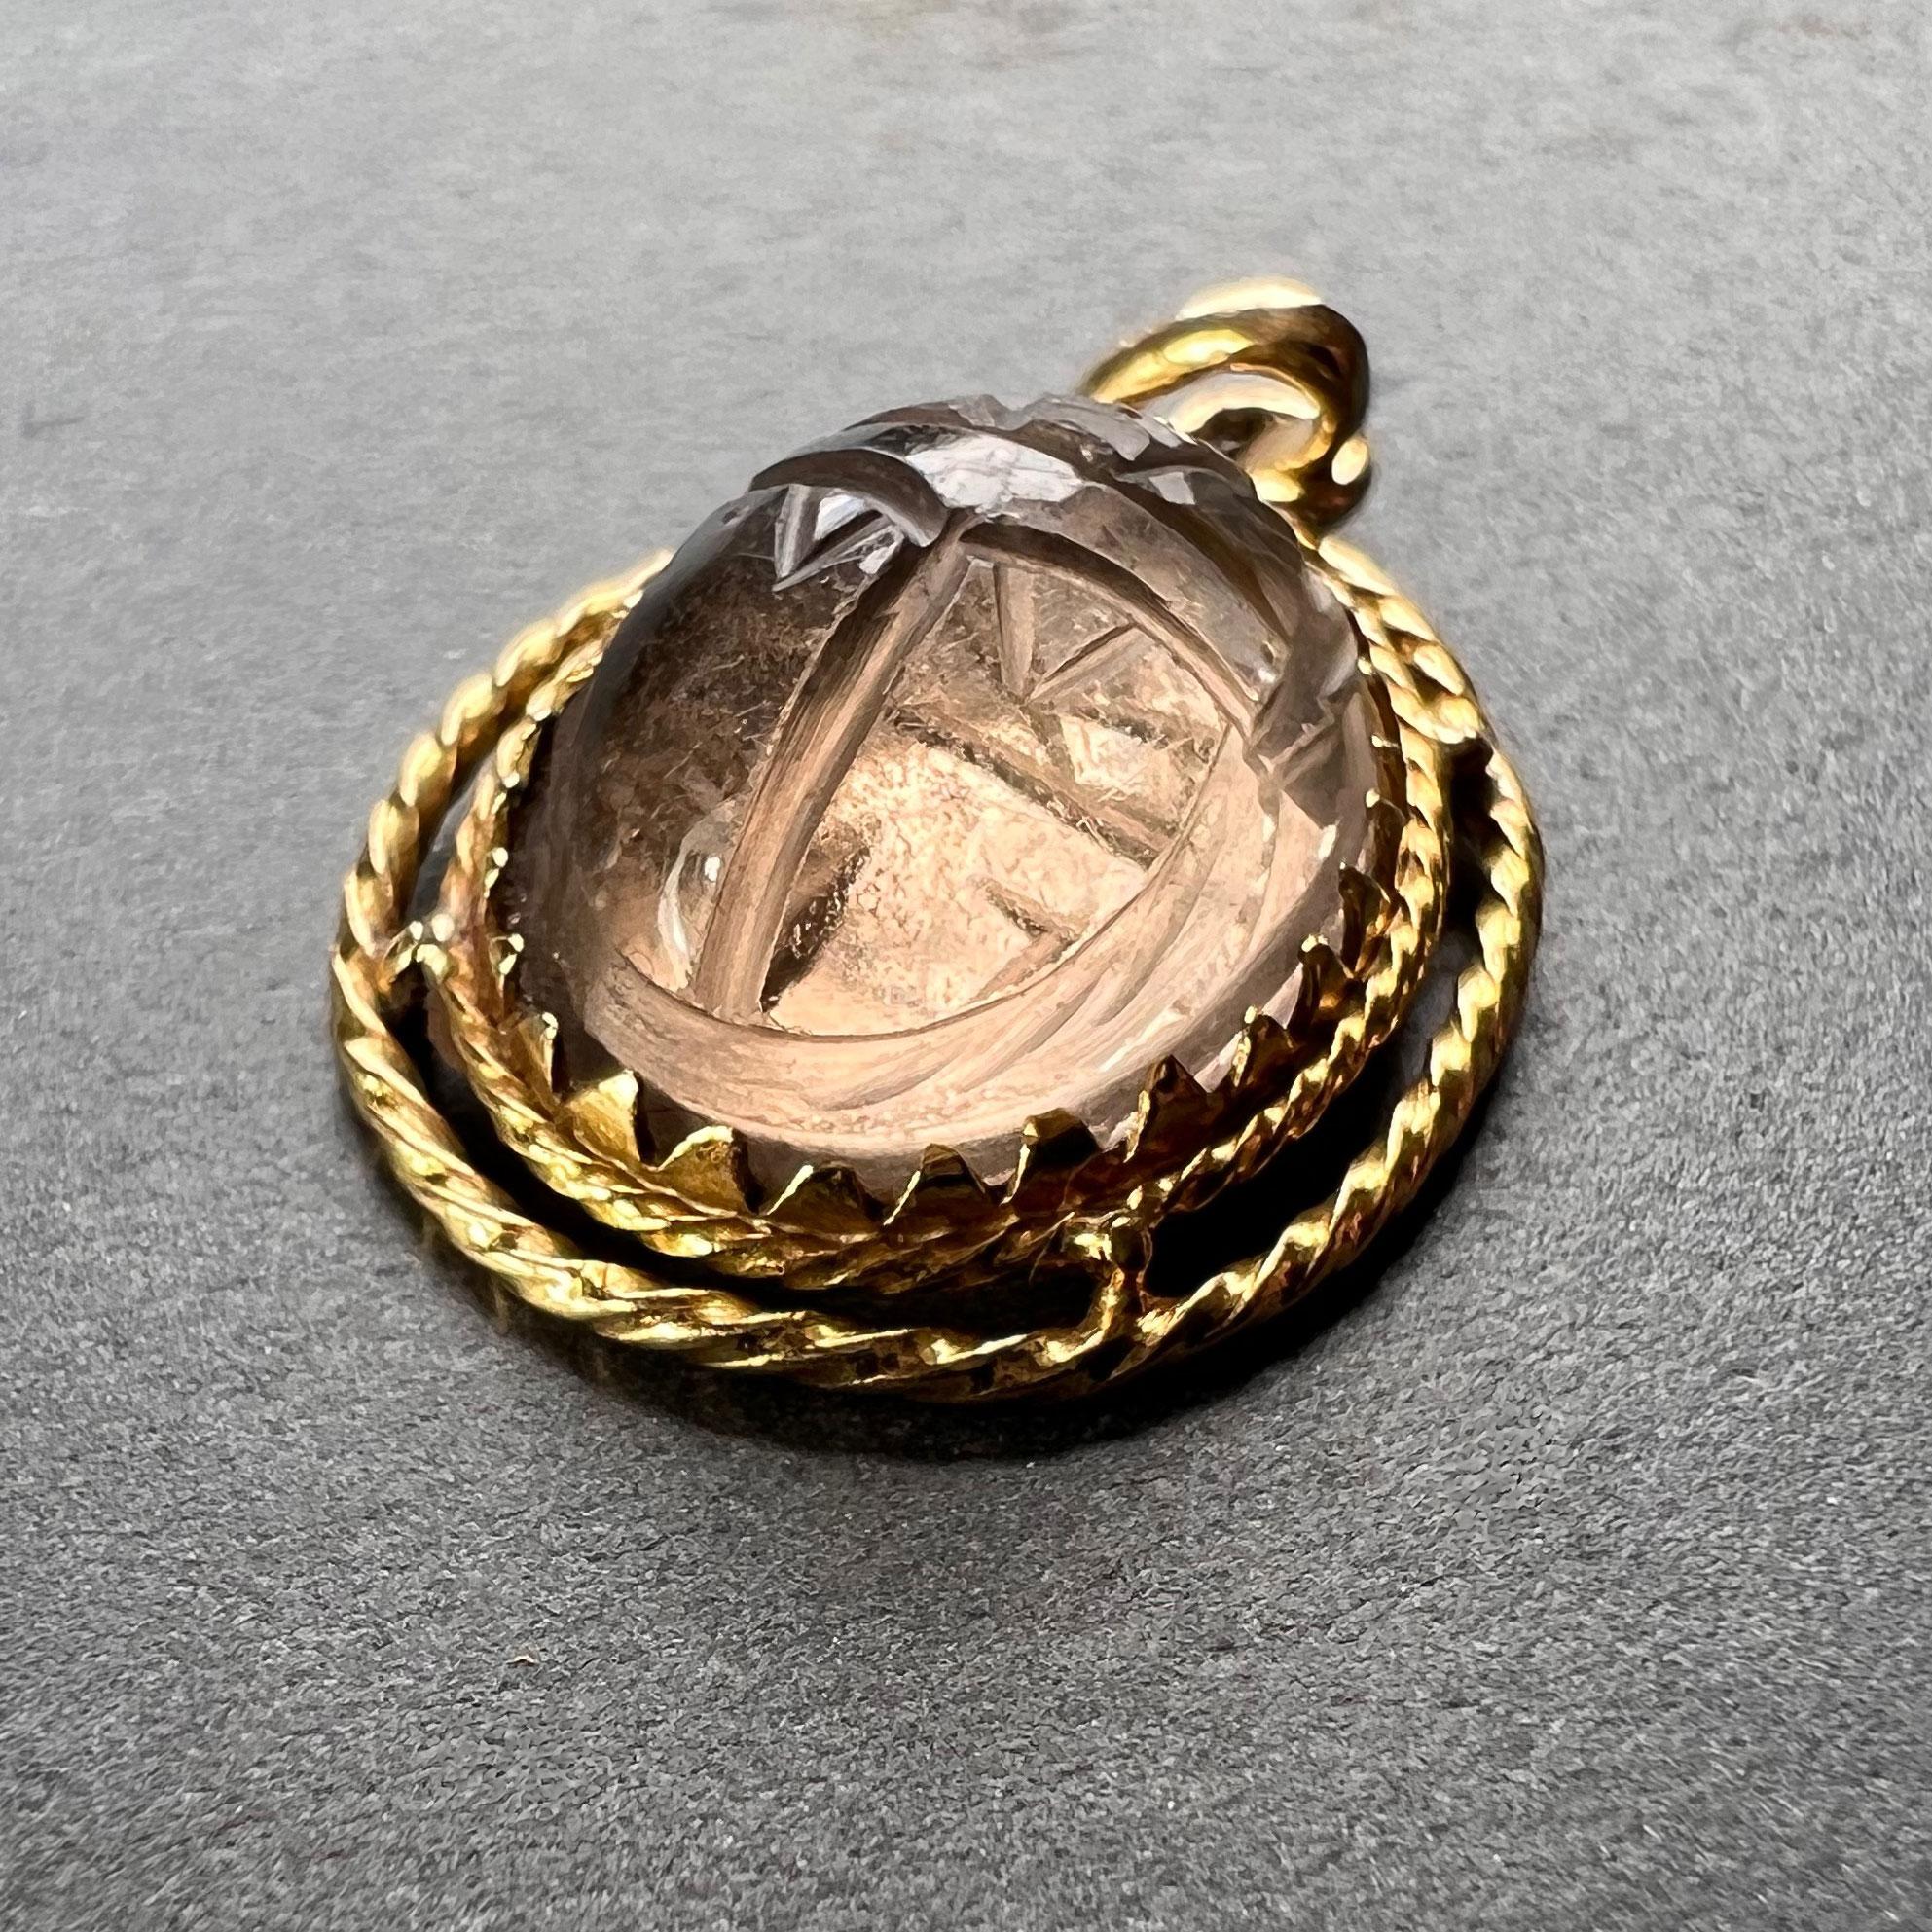 An 18 karat (18K) yellow gold charm pendant designed as the protective amulet of an Egyptian scarab in rock crystal quartz, engraved to both sides and encircled with twisted gold wire. Stamped with the eagle mark for 18 karat gold and French